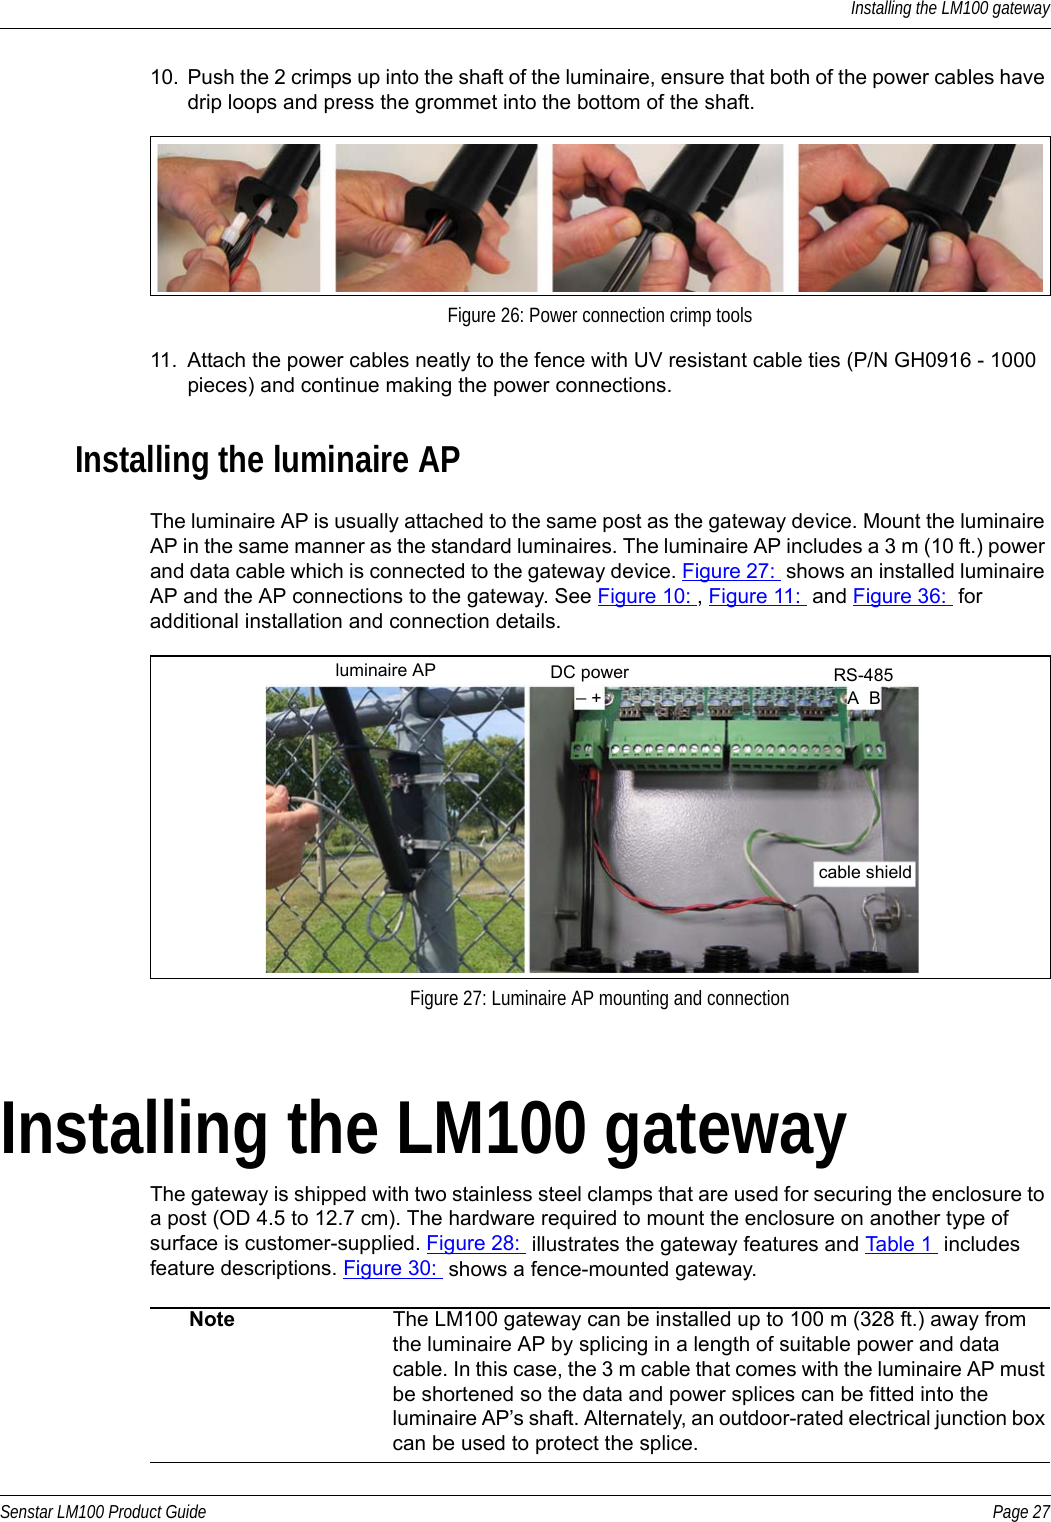 Installing the LM100 gatewaySenstar LM100 Product Guide Page 2710. Push the 2 crimps up into the shaft of the luminaire, ensure that both of the power cables have drip loops and press the grommet into the bottom of the shaft.11. Attach the power cables neatly to the fence with UV resistant cable ties (P/N GH0916 - 1000 pieces) and continue making the power connections.Installing the luminaire APThe luminaire AP is usually attached to the same post as the gateway device. Mount the luminaire AP in the same manner as the standard luminaires. The luminaire AP includes a 3 m (10 ft.) power and data cable which is connected to the gateway device. Figure 27:  shows an installed luminaire AP and the AP connections to the gateway. See Figure 10: , Figure 11:  and Figure 36:  for additional installation and connection details. Installing the LM100 gatewayThe gateway is shipped with two stainless steel clamps that are used for securing the enclosure to a post (OD 4.5 to 12.7 cm). The hardware required to mount the enclosure on another type of surface is customer-supplied. Figure 28:  illustrates the gateway features and Table 1  includes feature descriptions. Figure 30:  shows a fence-mounted gateway.    Figure 26: Power connection crimp toolsFigure 27: Luminaire AP mounting and connectionNote The LM100 gateway can be installed up to 100 m (328 ft.) away from the luminaire AP by splicing in a length of suitable power and data cable. In this case, the 3 m cable that comes with the luminaire AP must be shortened so the data and power splices can be fitted into the luminaire AP’s shaft. Alternately, an outdoor-rated electrical junction box can be used to protect the splice.cable shieldRS-485A  BDC power _ +luminaire AP